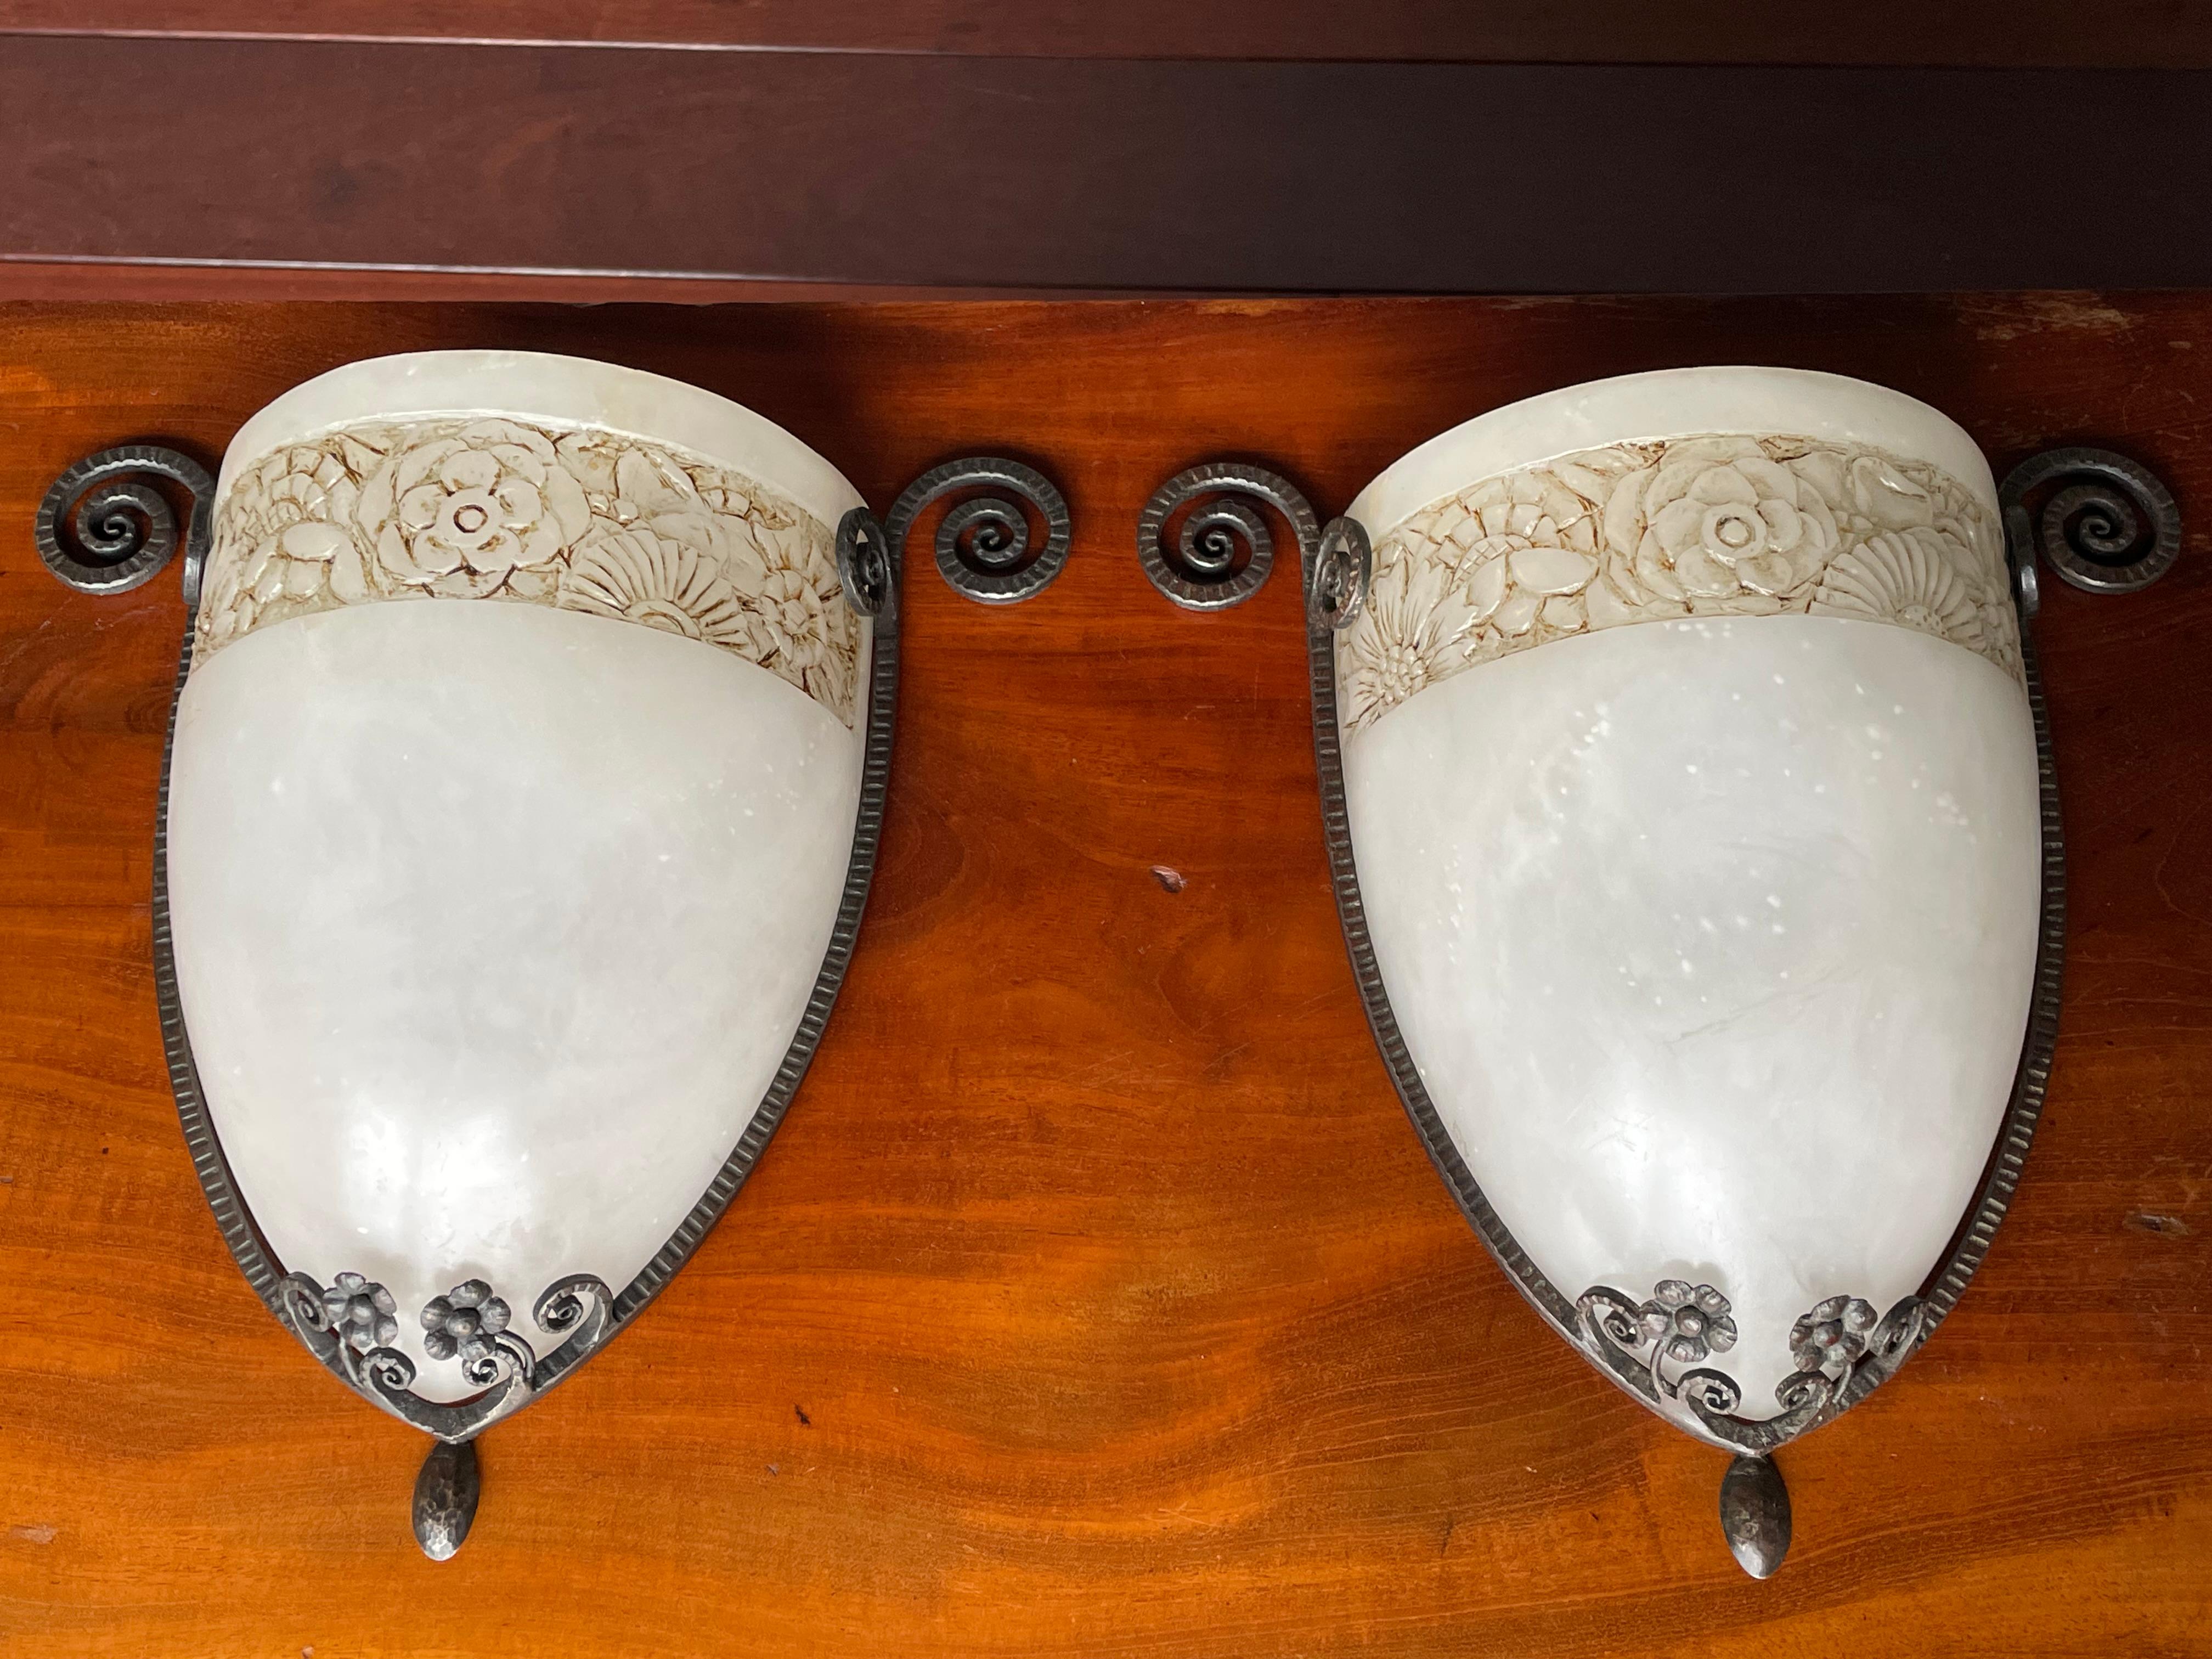 Polished Rare Pair of Elegant Art Deco Wall Sconces Hand Forged Wrought Iron & Alabaster For Sale